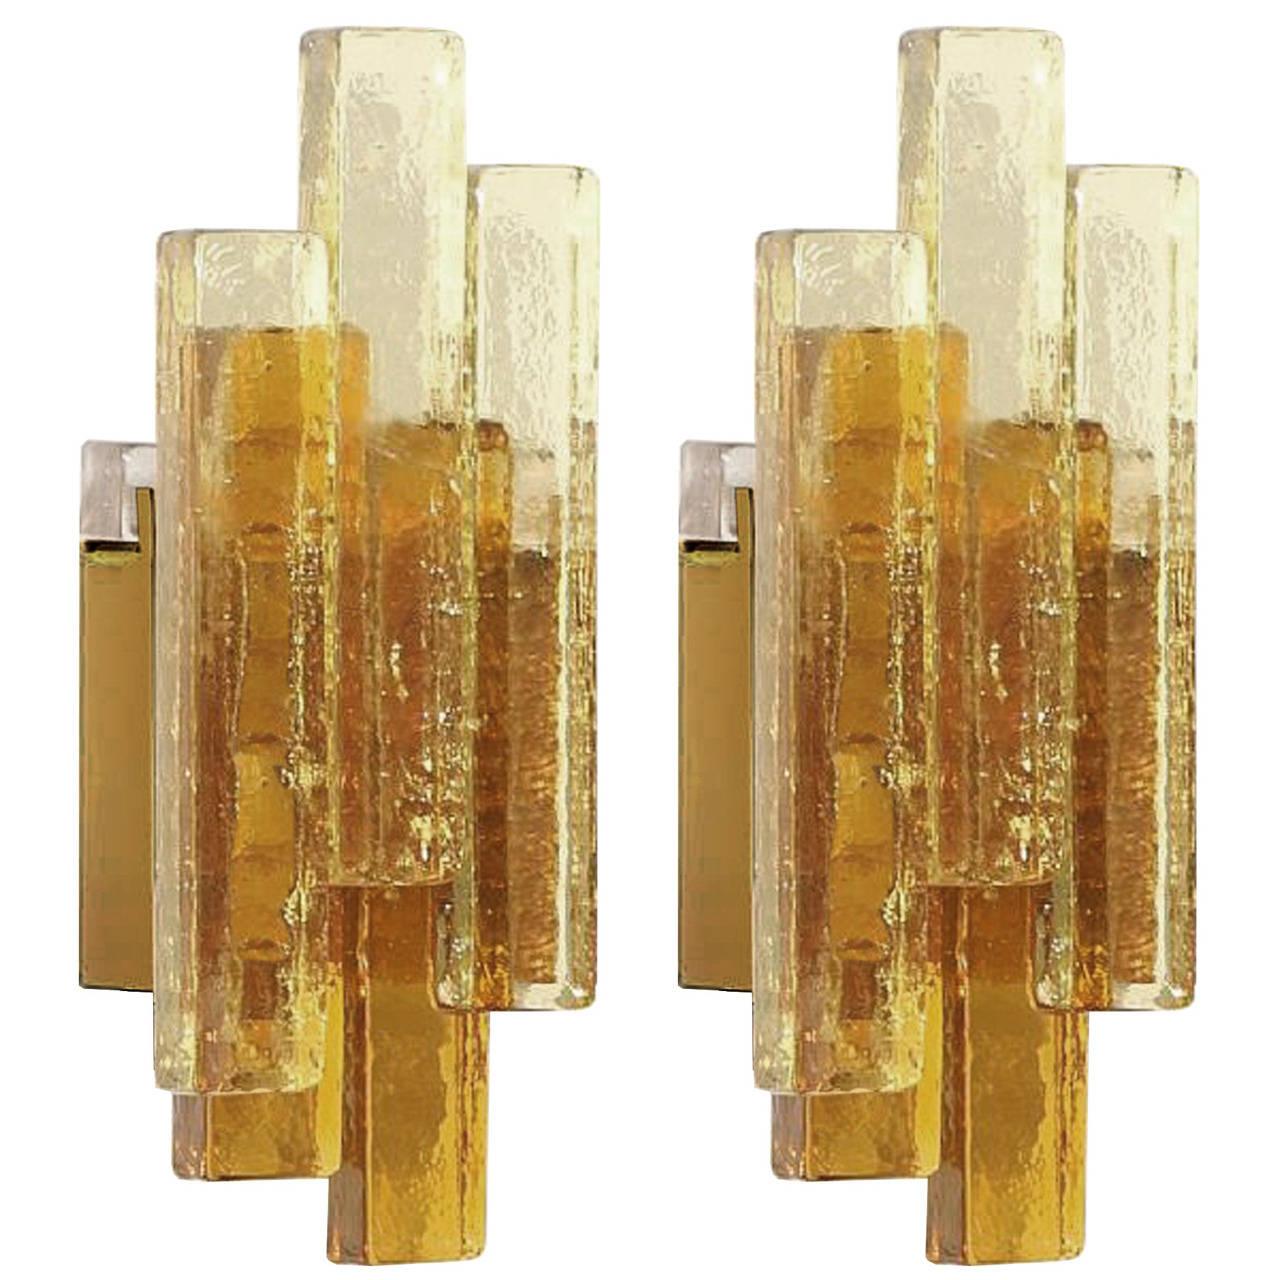 Danish Pair of Amber Glass Sconces by Svend Aage Holm Sorensen, (two pair available) For Sale